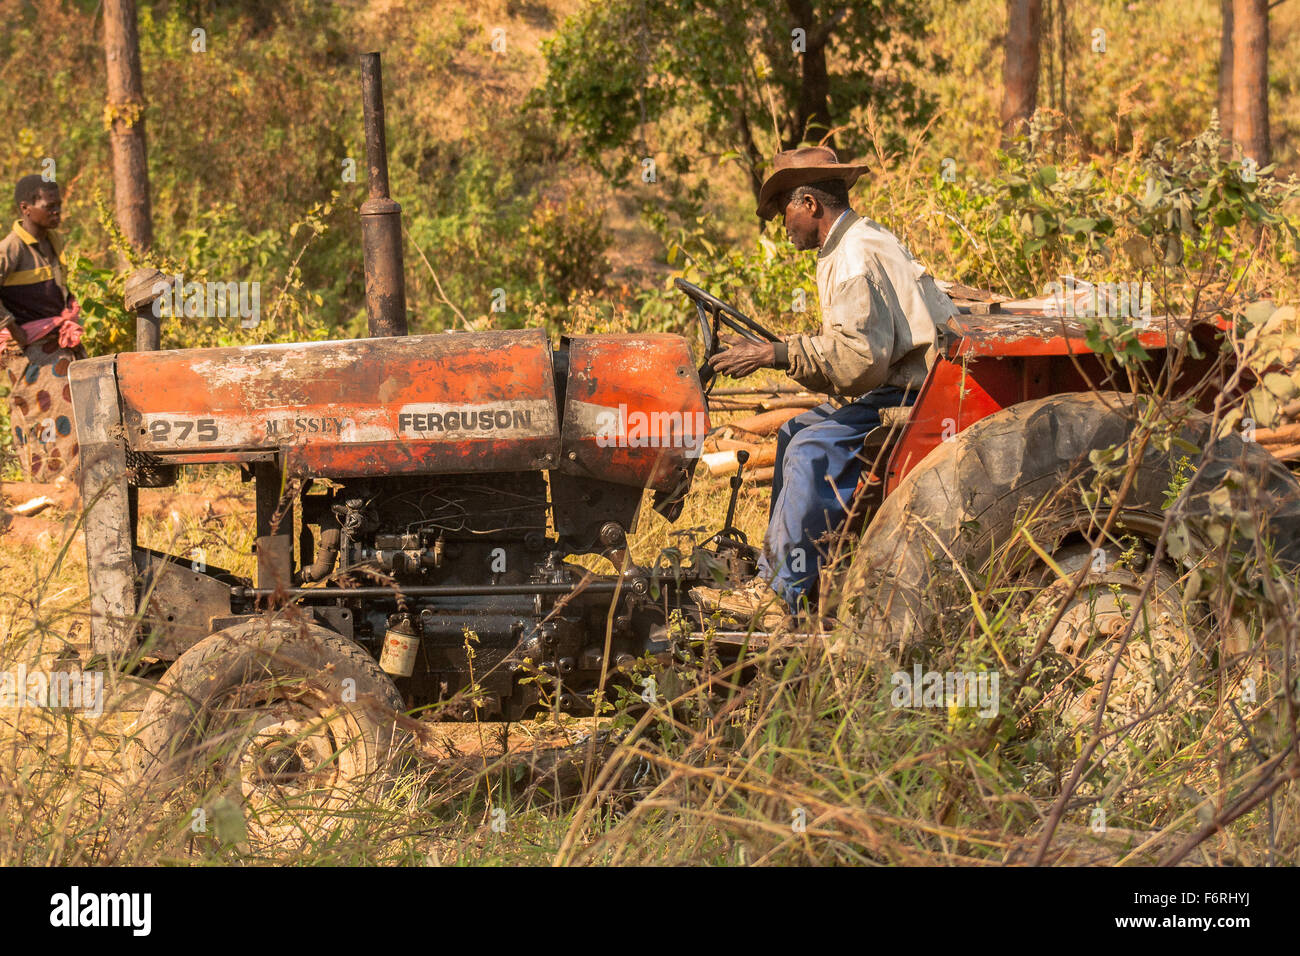 A very old Massey Ferguson tractor in use pulling tree trunks, by a driver wearing old hat, Dedza, Malawi, Africa Stock Photo